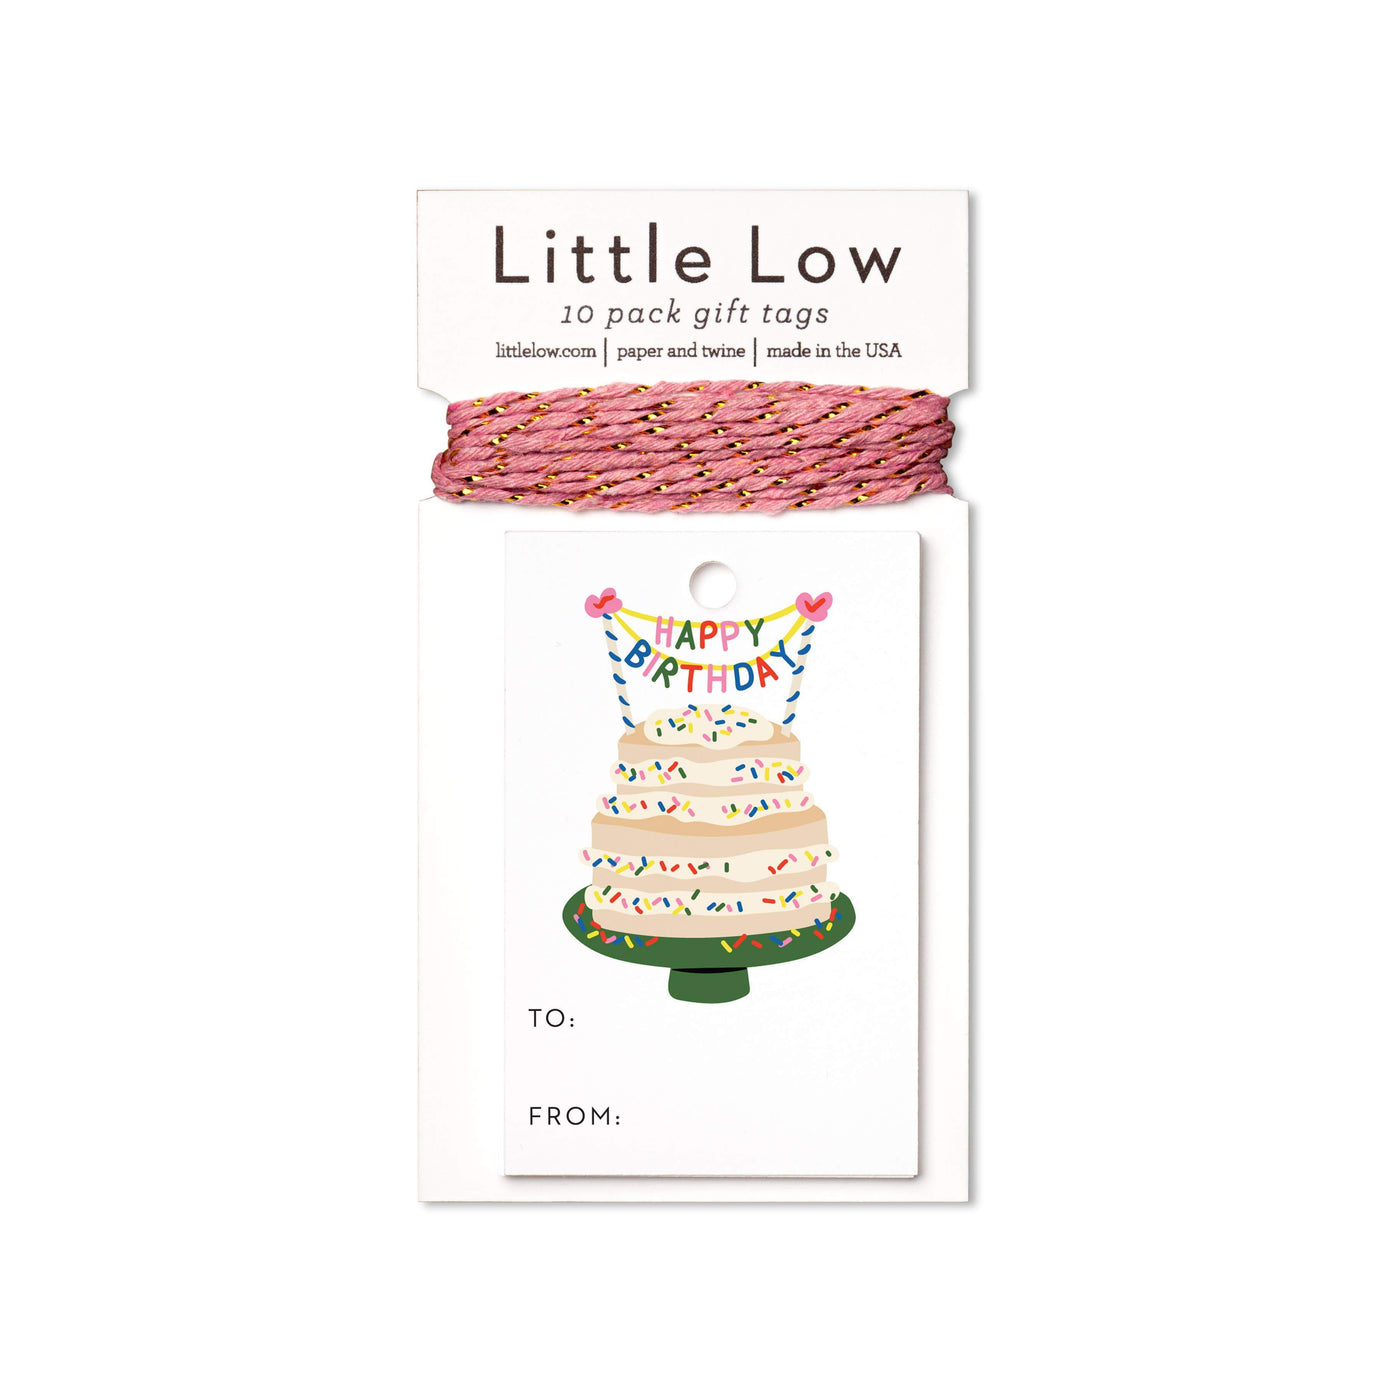 Funfetti Cake Gift Tags featuring a gift tag with a funfetti cake and twine in coordinating colors